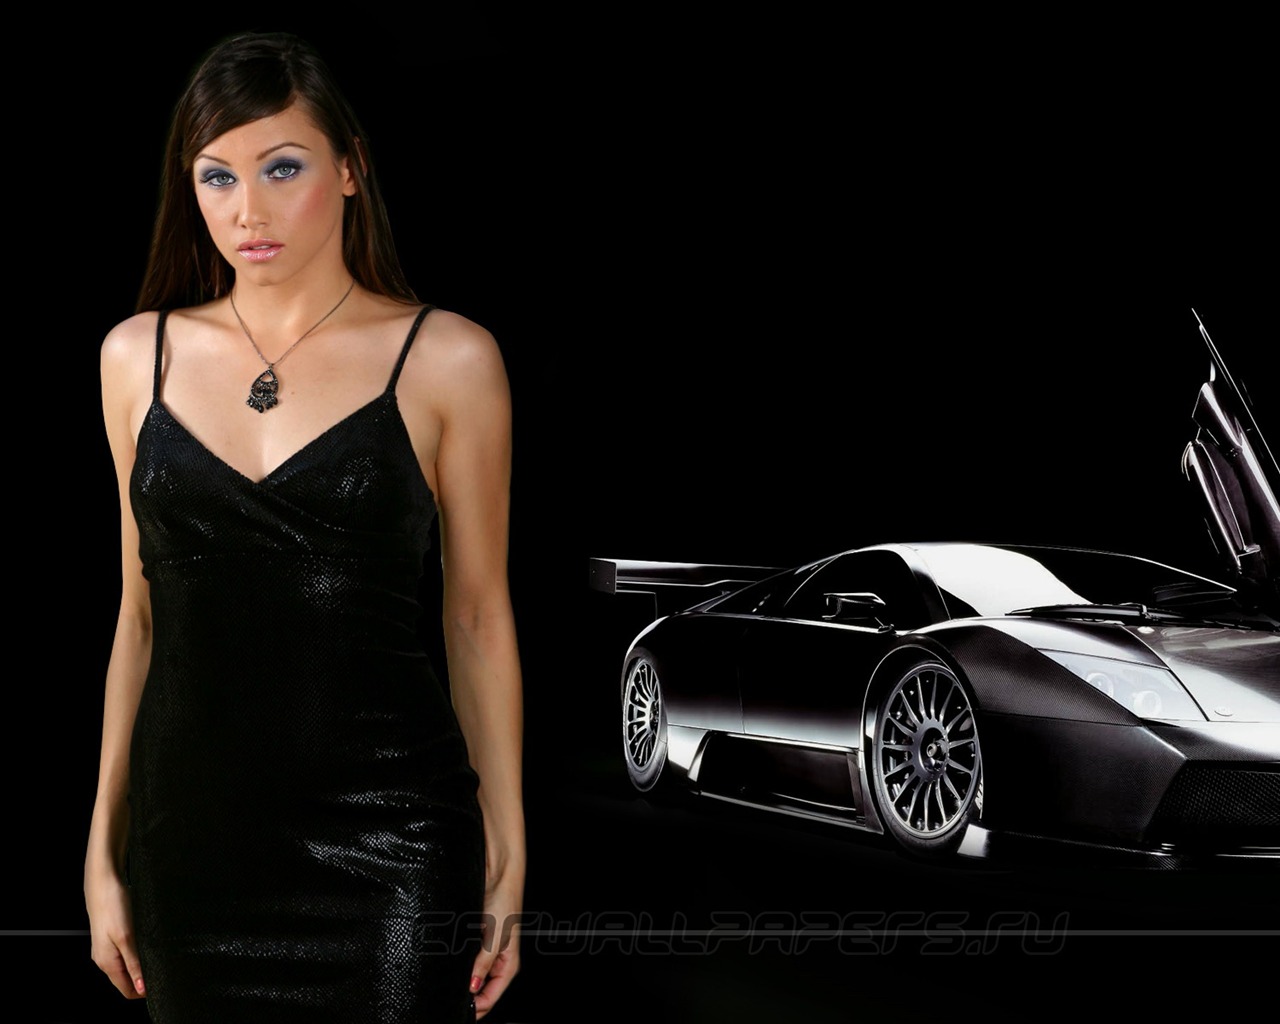 Cars and Girls wallpapers (2) #3 - 1280x1024